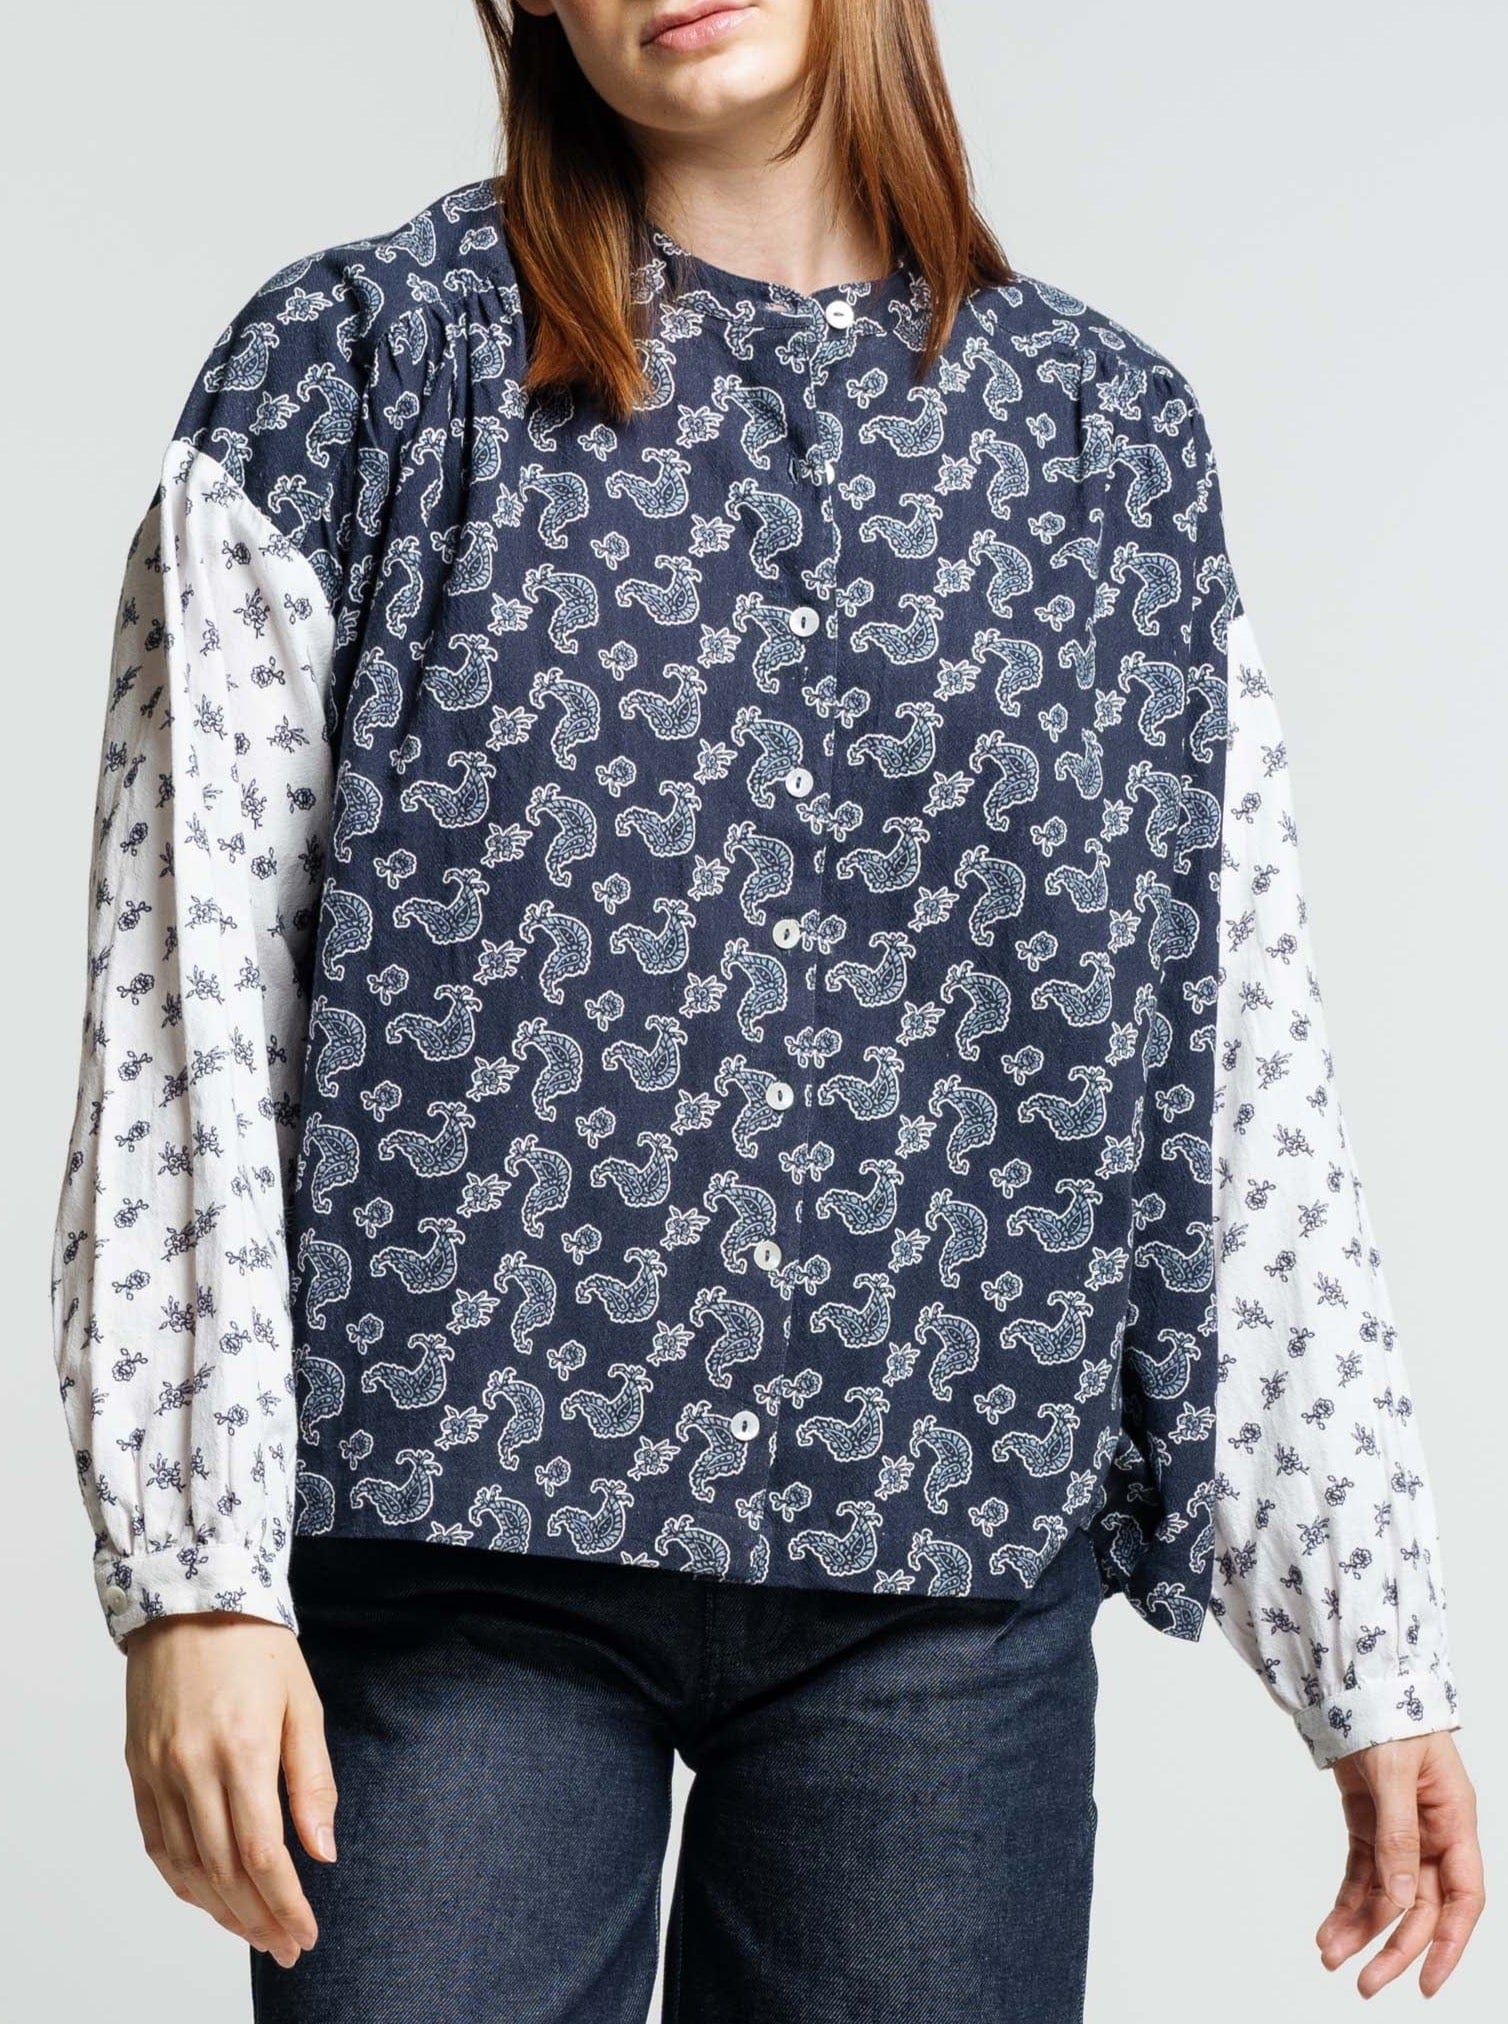 The Francoise Top - Indigo Paisley Block is a 70s style organic crimp cotton shirt with a vibrant blue and white paisley pattern.